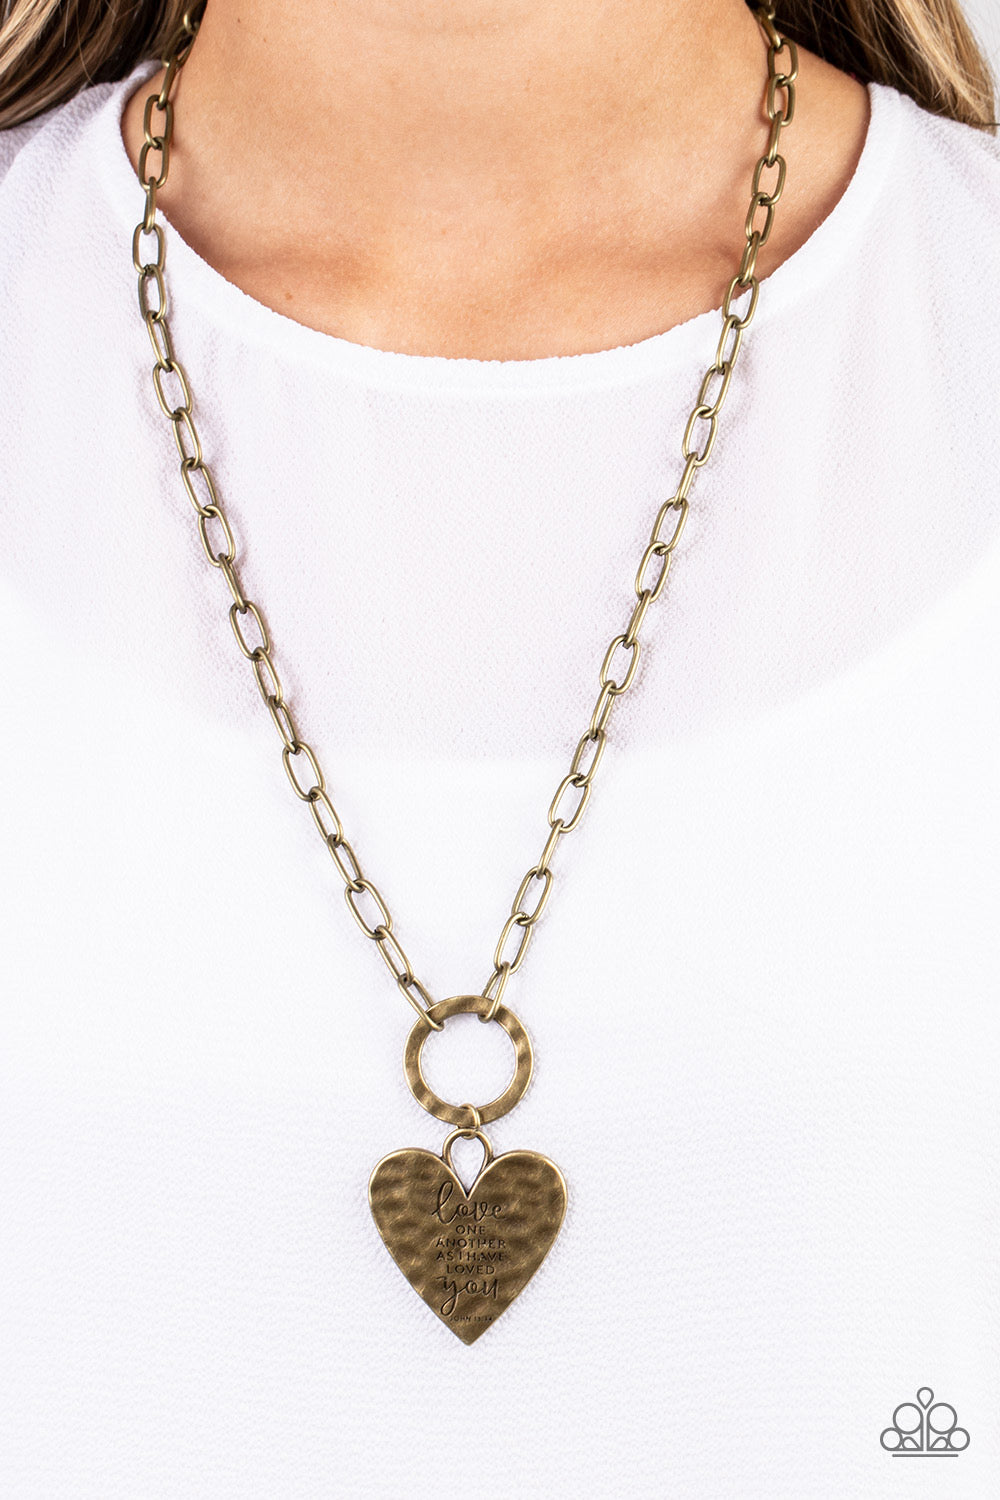 Paparazzi Brotherly Love - Brass Necklace -Paparazzi Jewelry Images 